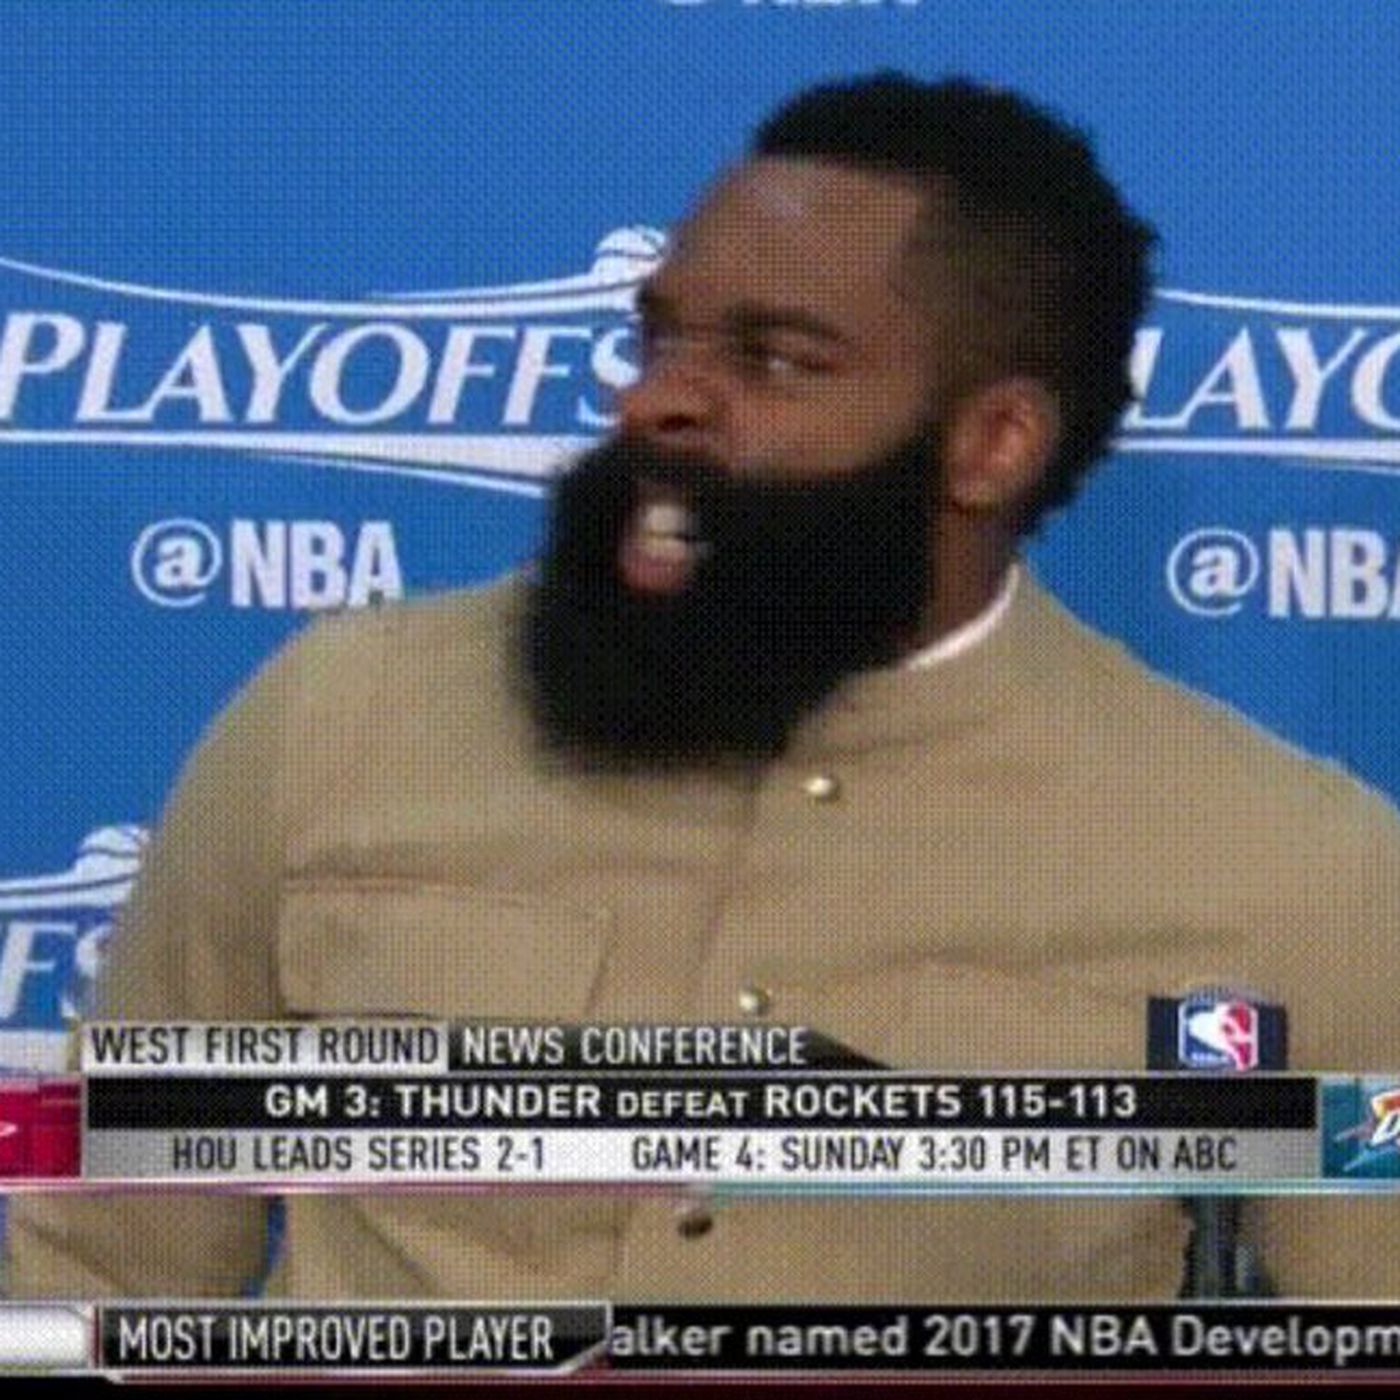 James Harden's press conference grimace is a perfect new meme 